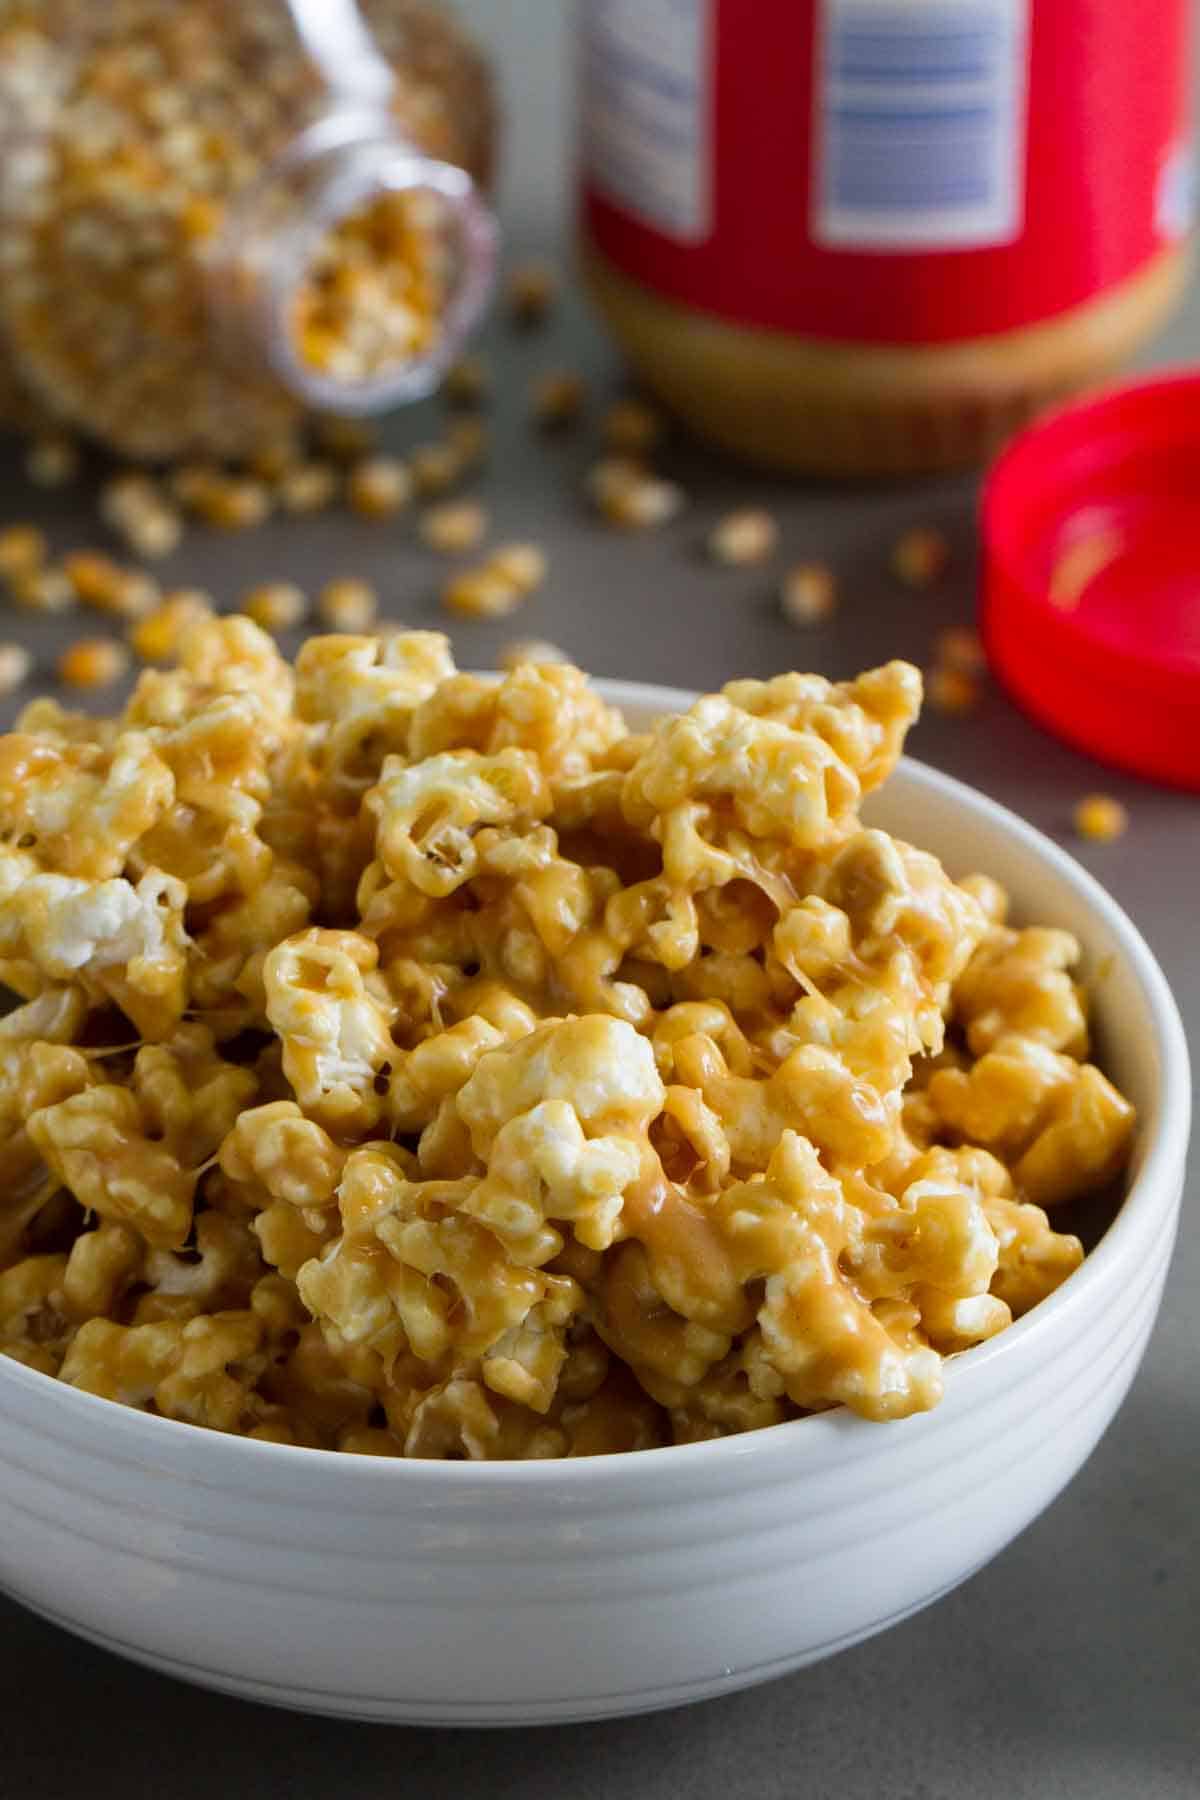 Bowl of peanut butter popcorn with more popcorn in the background.